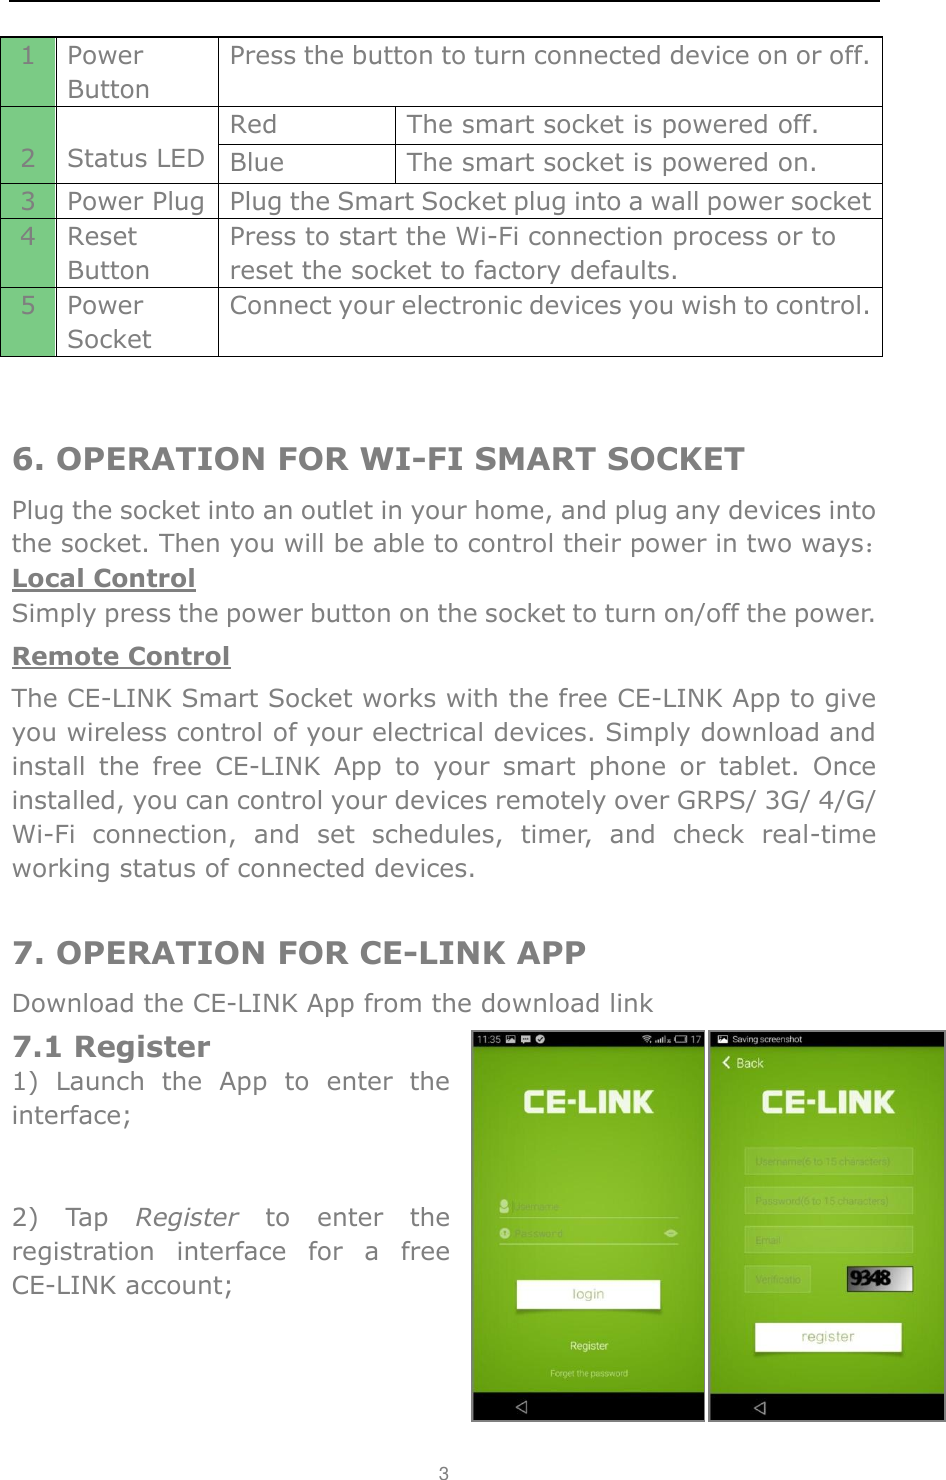                 3   6. OPERATION FOR WI-FI SMART SOCKET Plug the socket into an outlet in your home, and plug any devices into the socket. Then you will be able to control their power in two ways： Local Control Simply press the power button on the socket to turn on/off the power. Remote Control The CE-LINK Smart Socket works with the free CE-LINK App to give you wireless control of your electrical devices. Simply download and install  the  free  CE-LINK  App  to  your  smart  phone  or  tablet.  Once installed, you can control your devices remotely over GRPS/ 3G/ 4/G/ Wi-Fi  connection,  and  set  schedules,  timer,  and  check  real-time working status of connected devices.    7. OPERATION FOR CE-LINK APP Download the CE-LINK App from the download link 7.1 Register 1)  Launch  the  App  to  enter  the interface;     2)  Tap  Register  to  enter  the registration  interface  for  a  free CE-LINK account;                           1 Power Button Press the button to turn connected device on or off.  2  Status LED Red The smart socket is powered off.   Blue The smart socket is powered on. 3 Power Plug Plug the Smart Socket plug into a wall power socket 4 Reset Button Press to start the Wi-Fi connection process or to reset the socket to factory defaults. 5 Power Socket Connect your electronic devices you wish to control.   